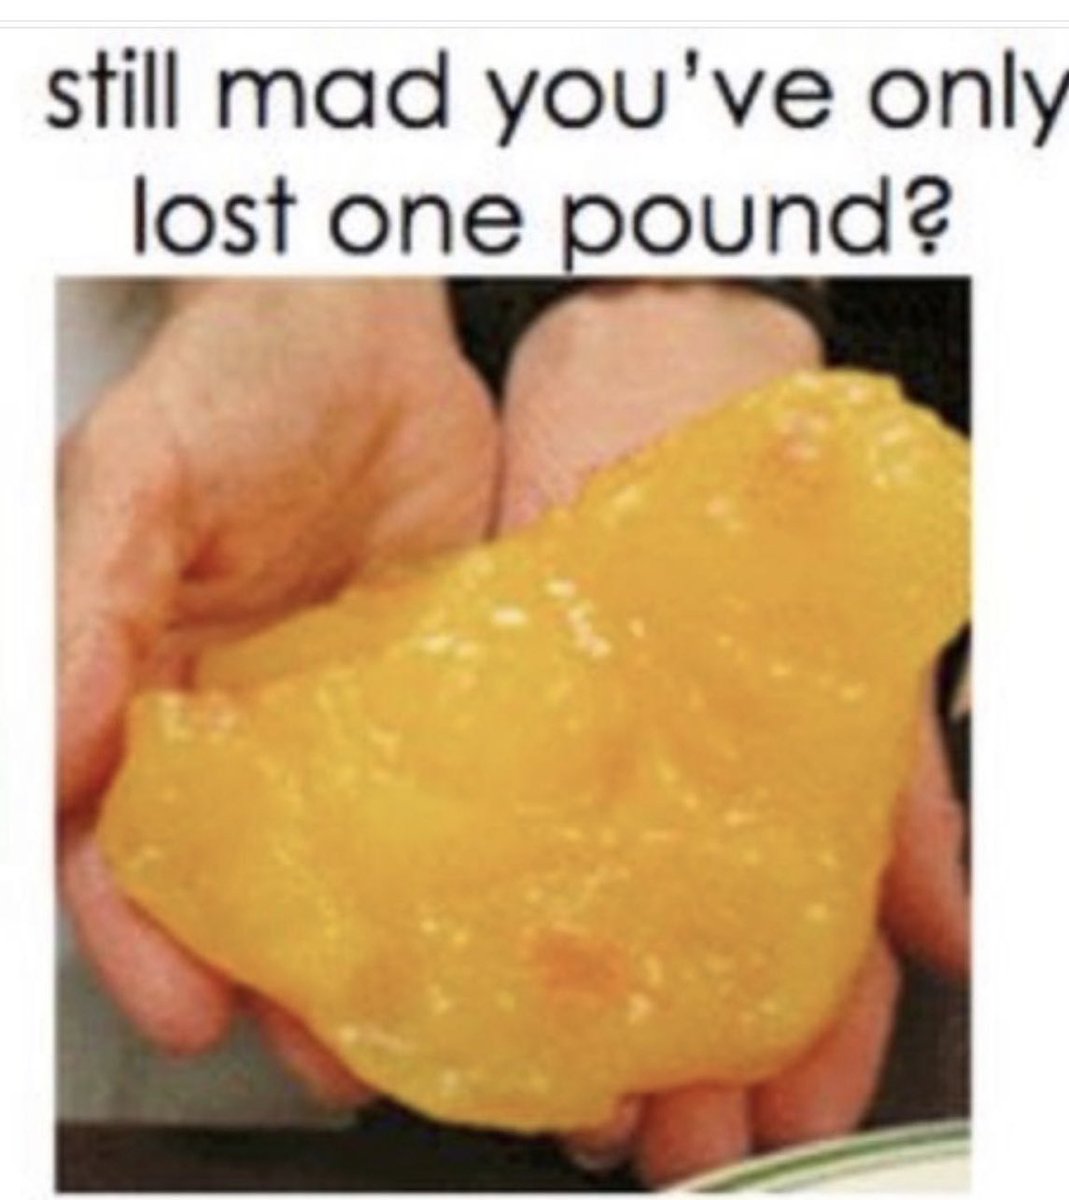 When we say “I’ve only lost a pound” 😱#One2OneDiet #weightloss #freeconsultations #bestdiet #dietsupport